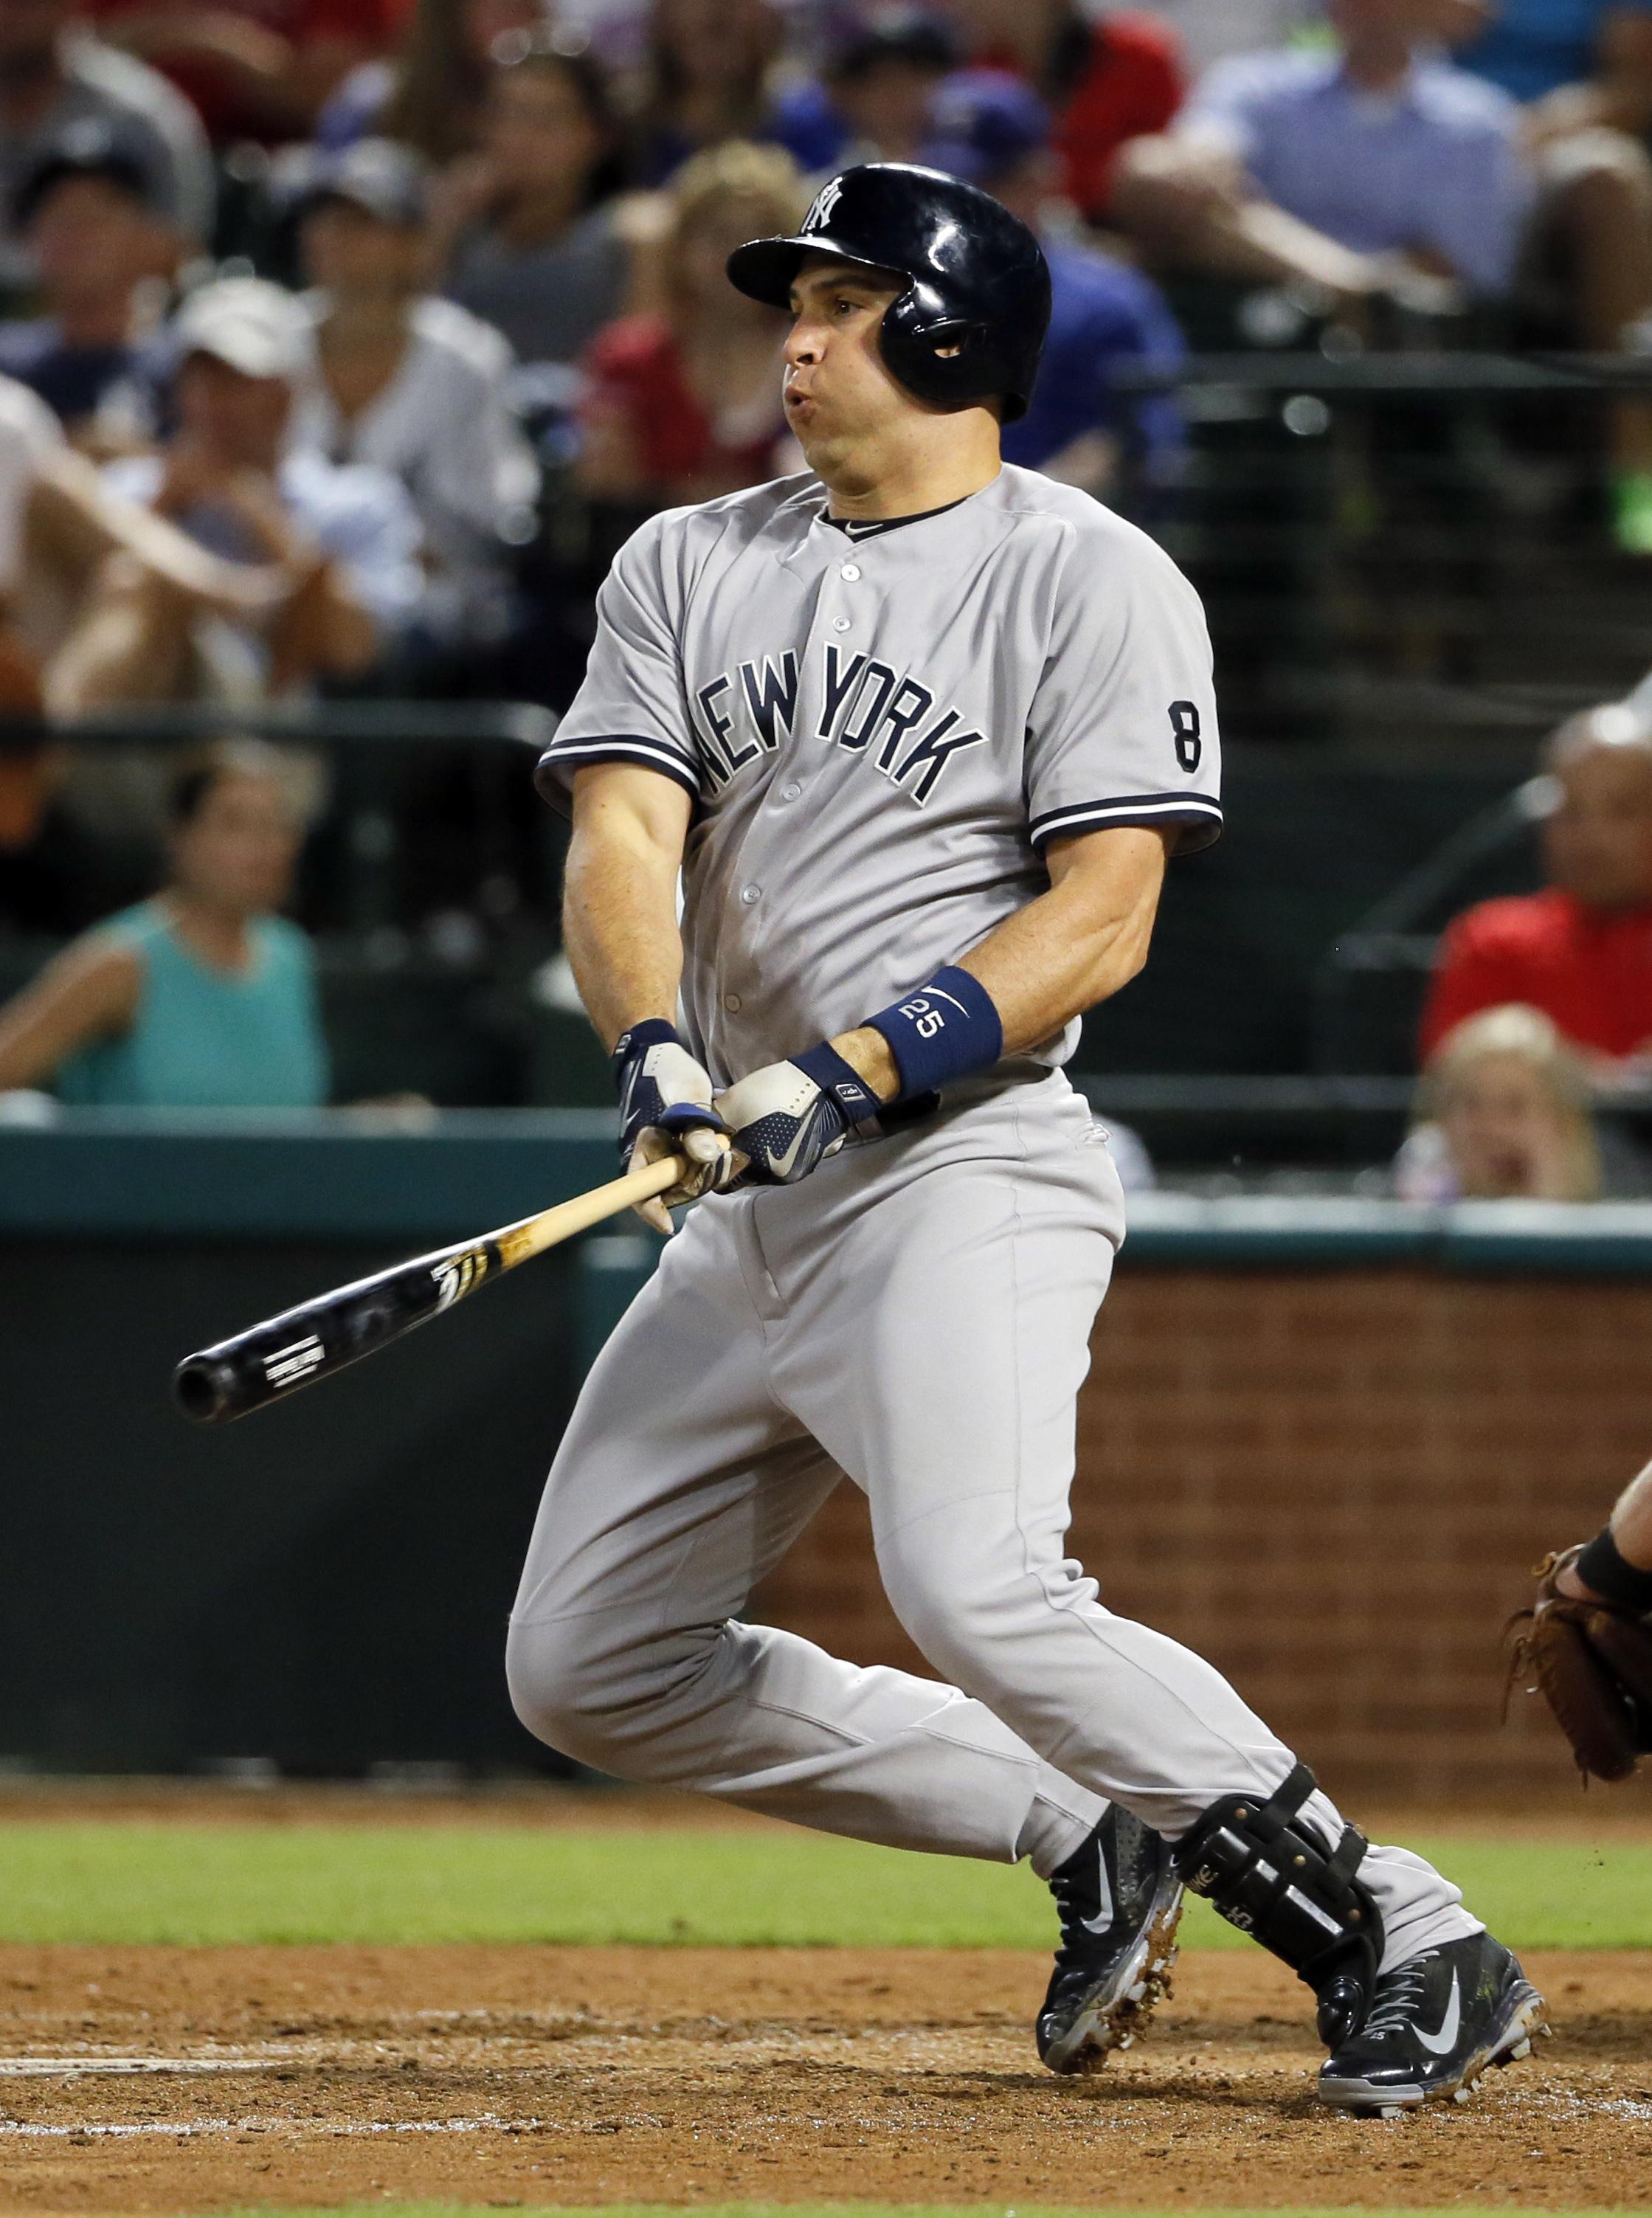 Mark Teixeira, citing injuries, to retire after season – Daily News